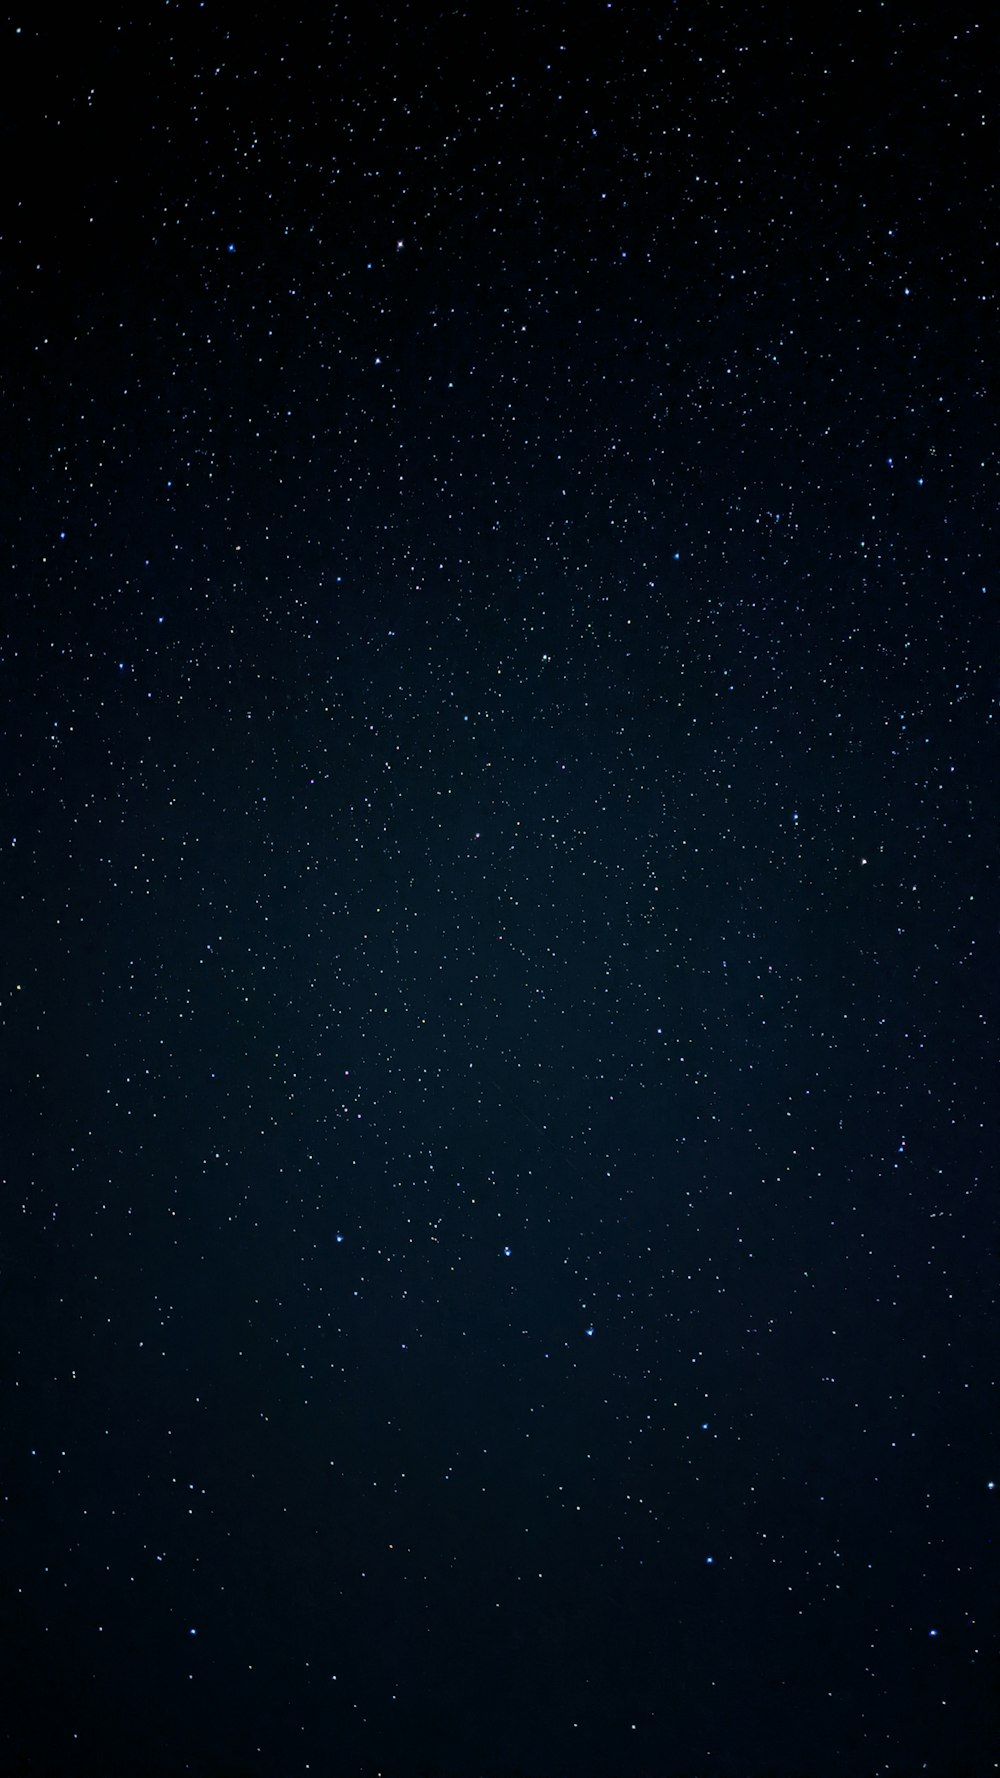 black and white stars during night time